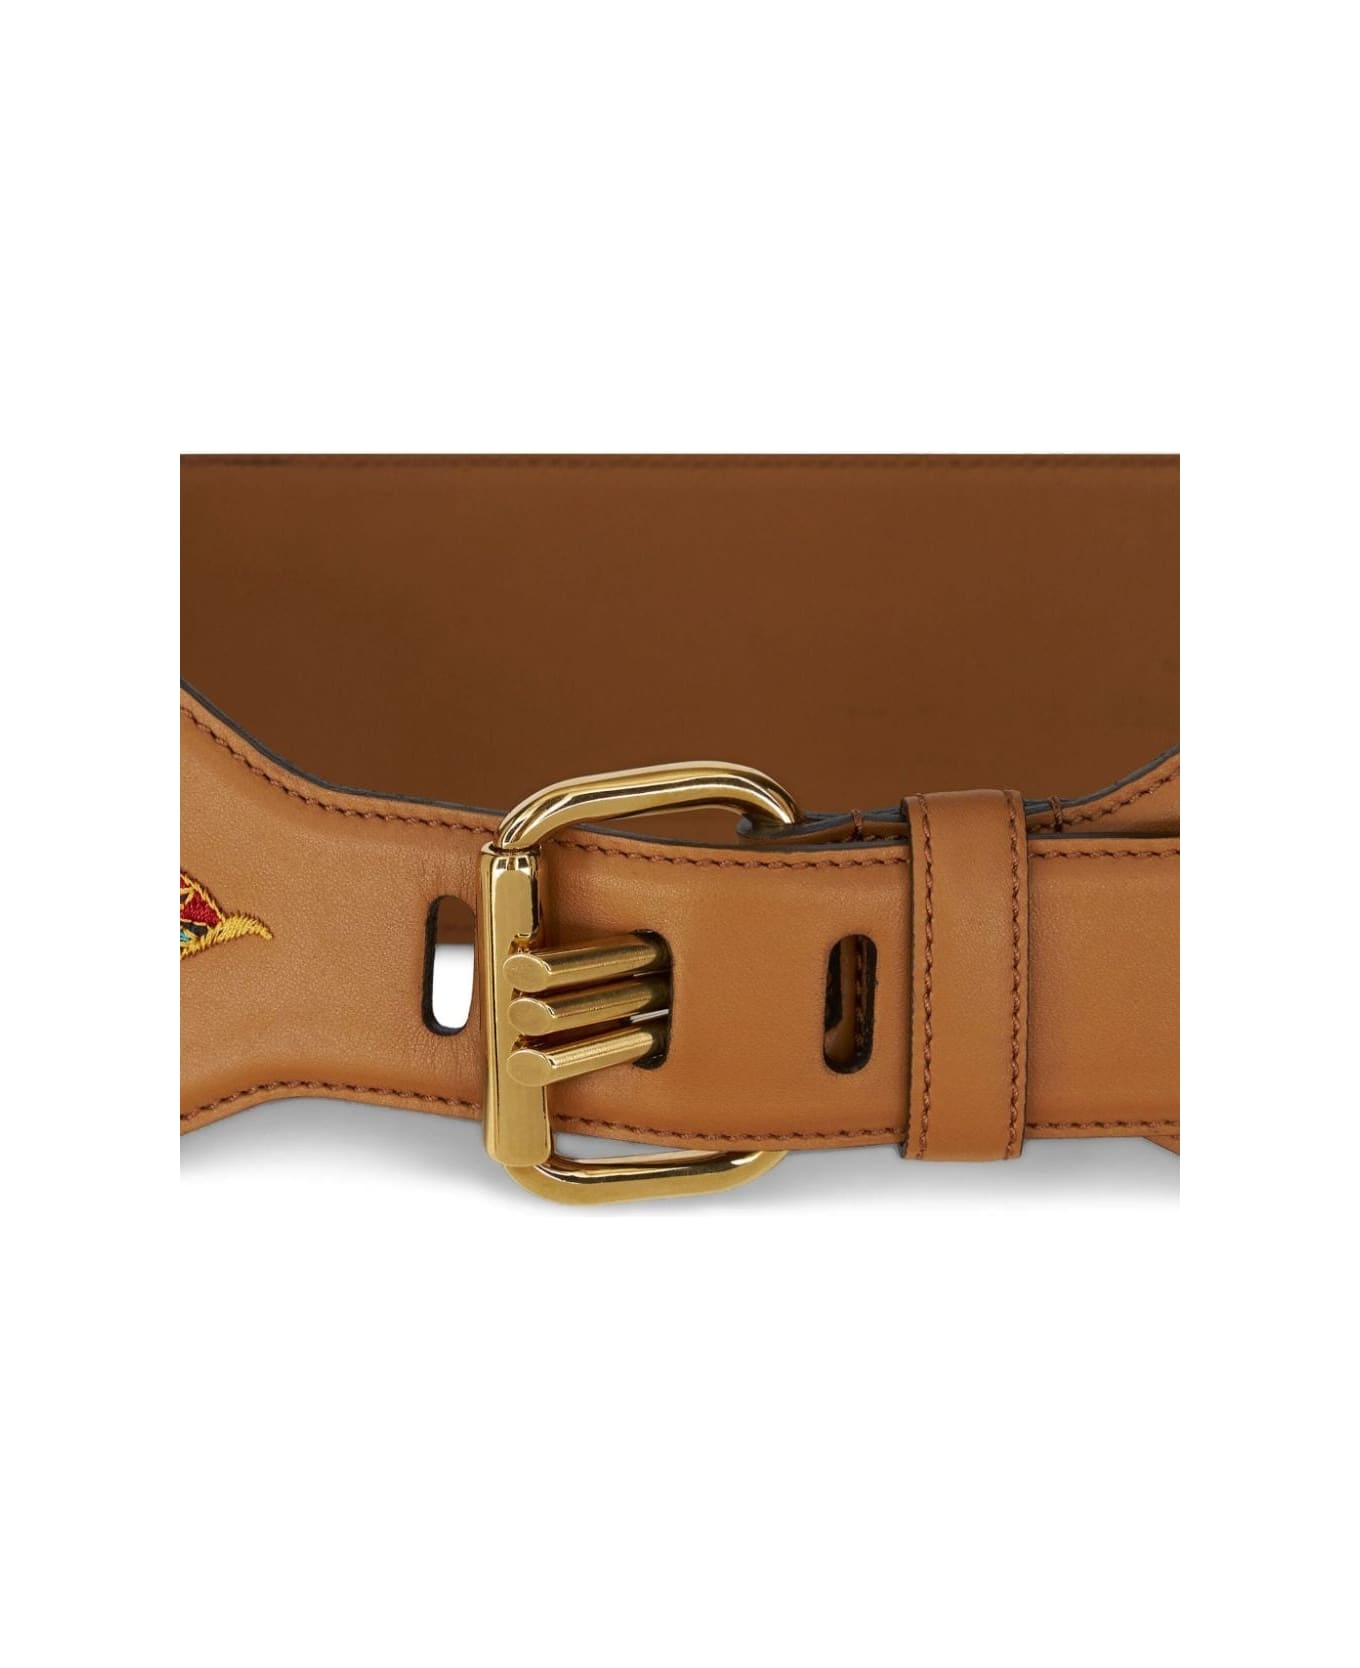 Etro Embroidered Brown Leather Belt - Bruciato